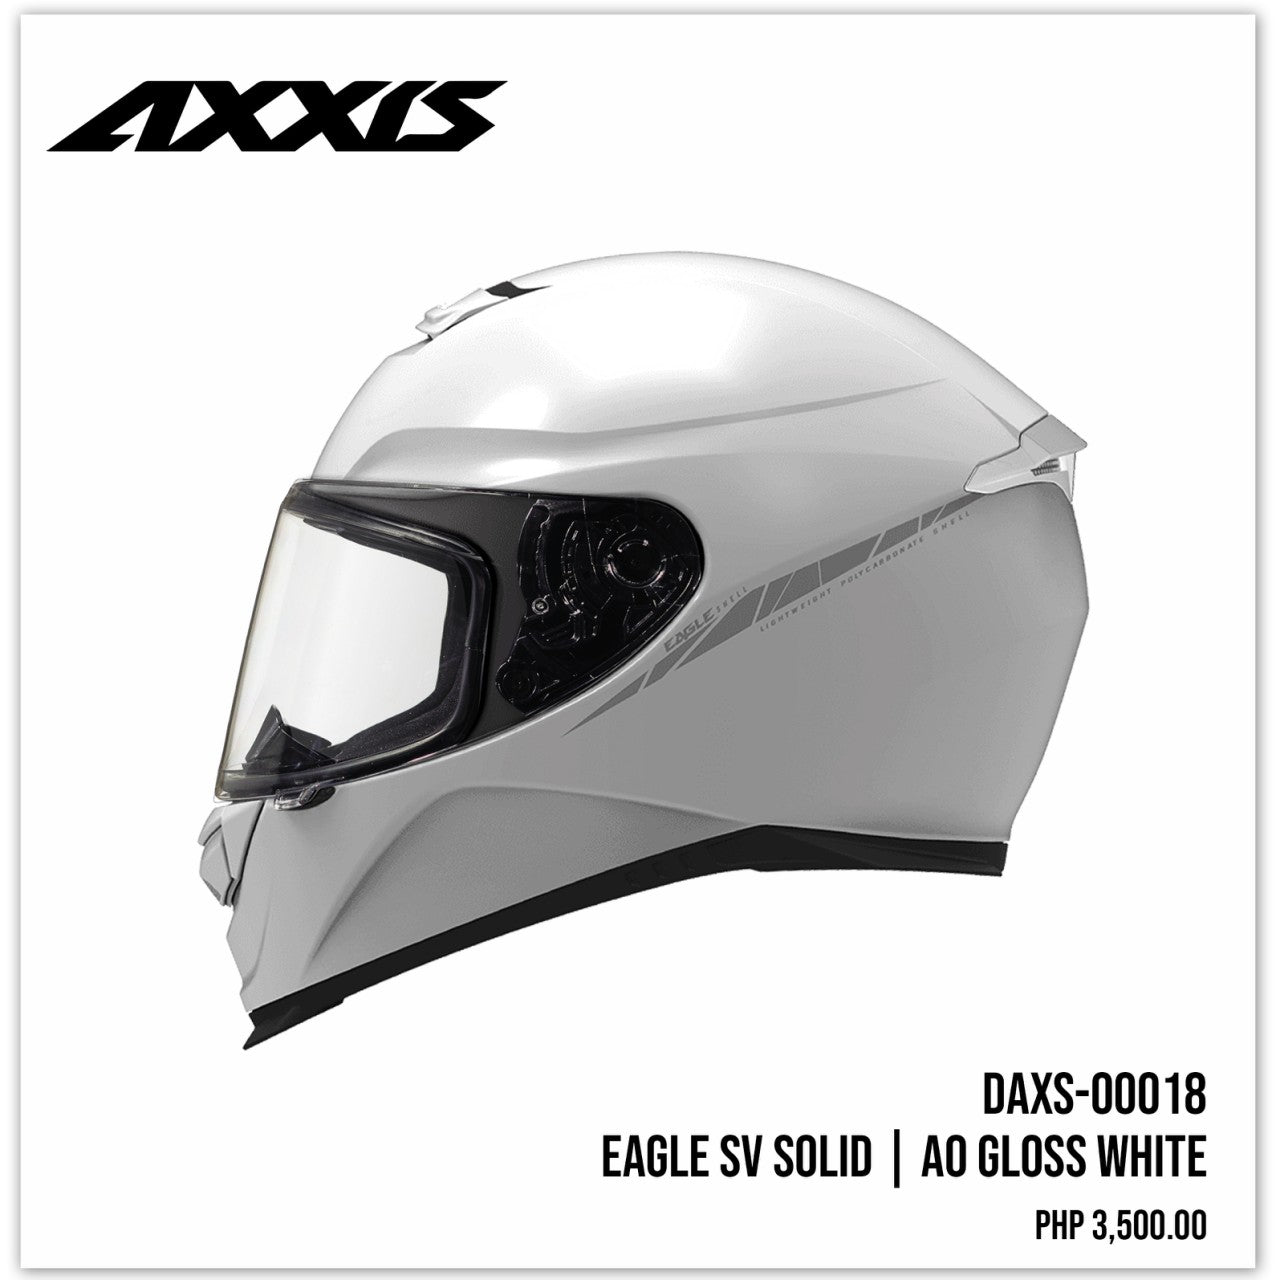 Eagle SV Solid A0 Gloss Pearl White